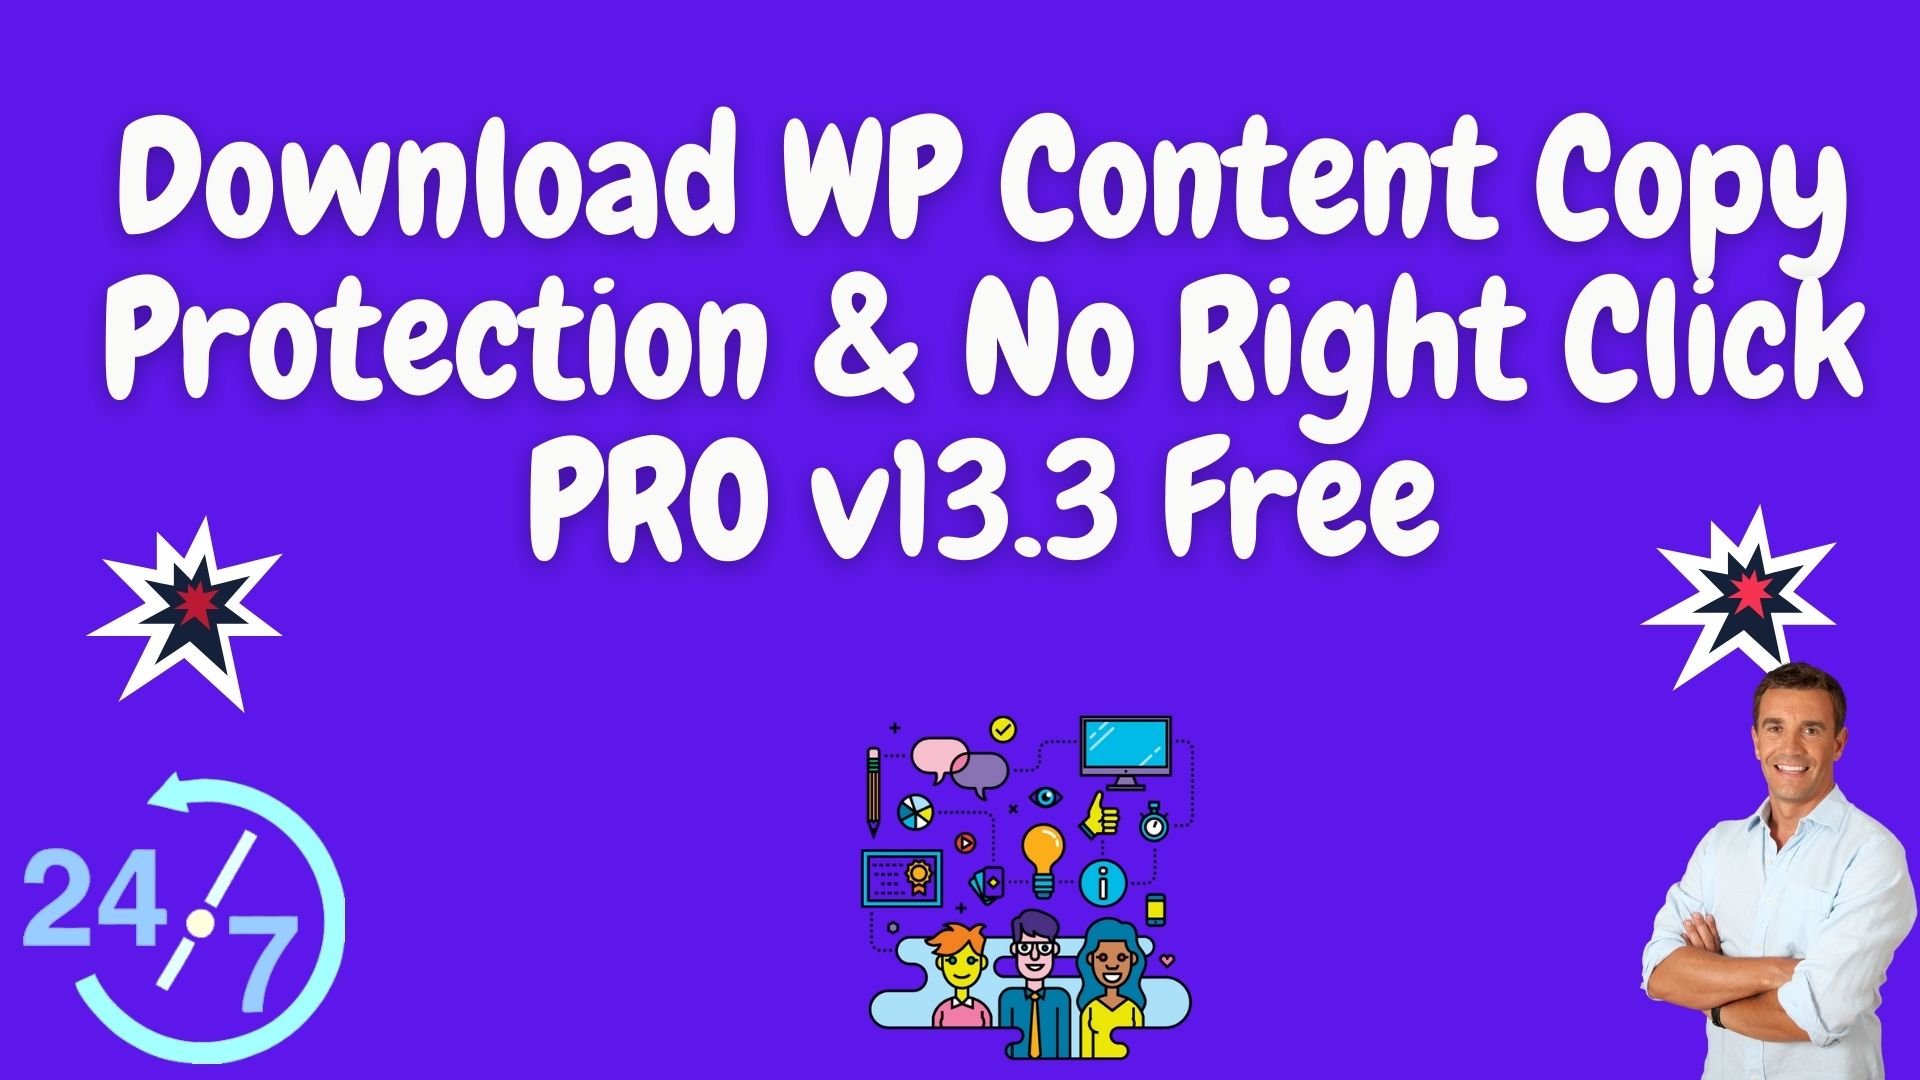 Download wp content copy protection & no right click pro v13. 3 free